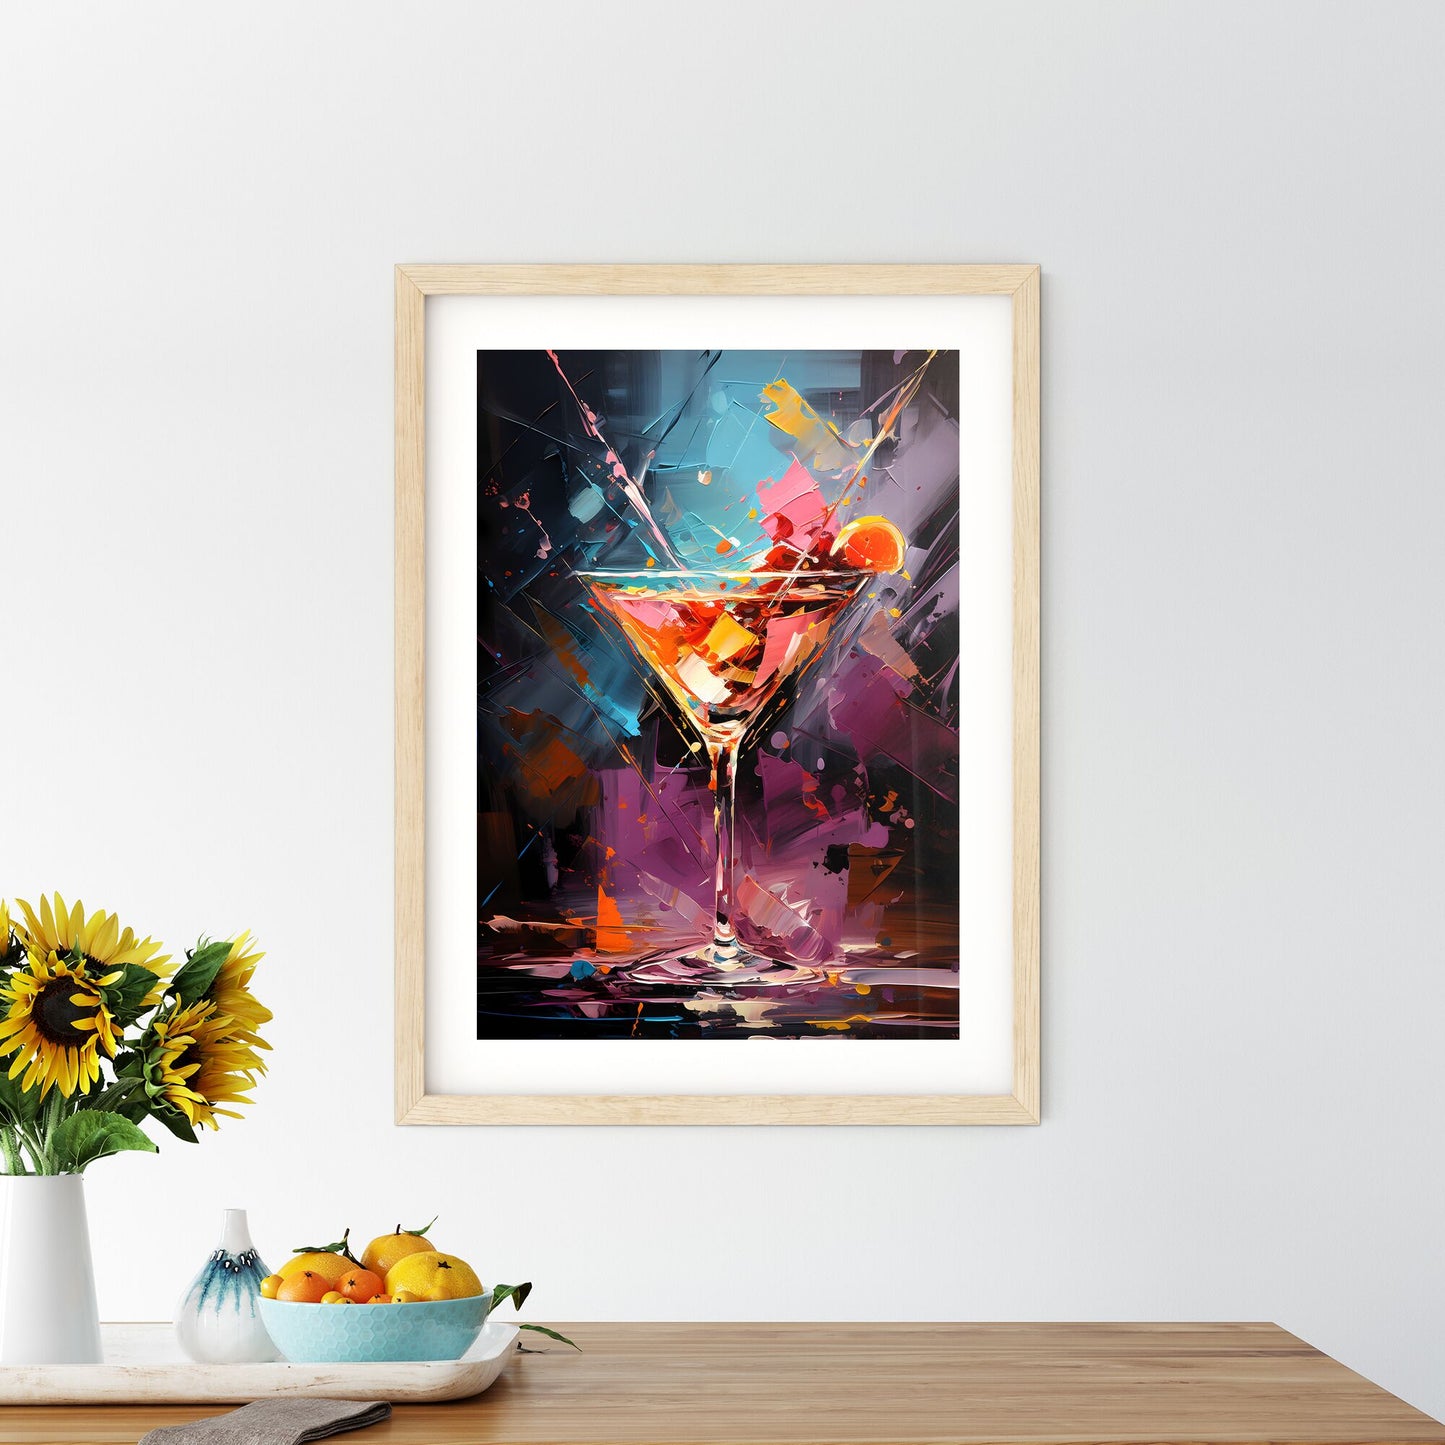 A Cosmopolitan Or Informally A Cosmo Cocktail - A Colorful Painting Of A Martini Glass Default Title